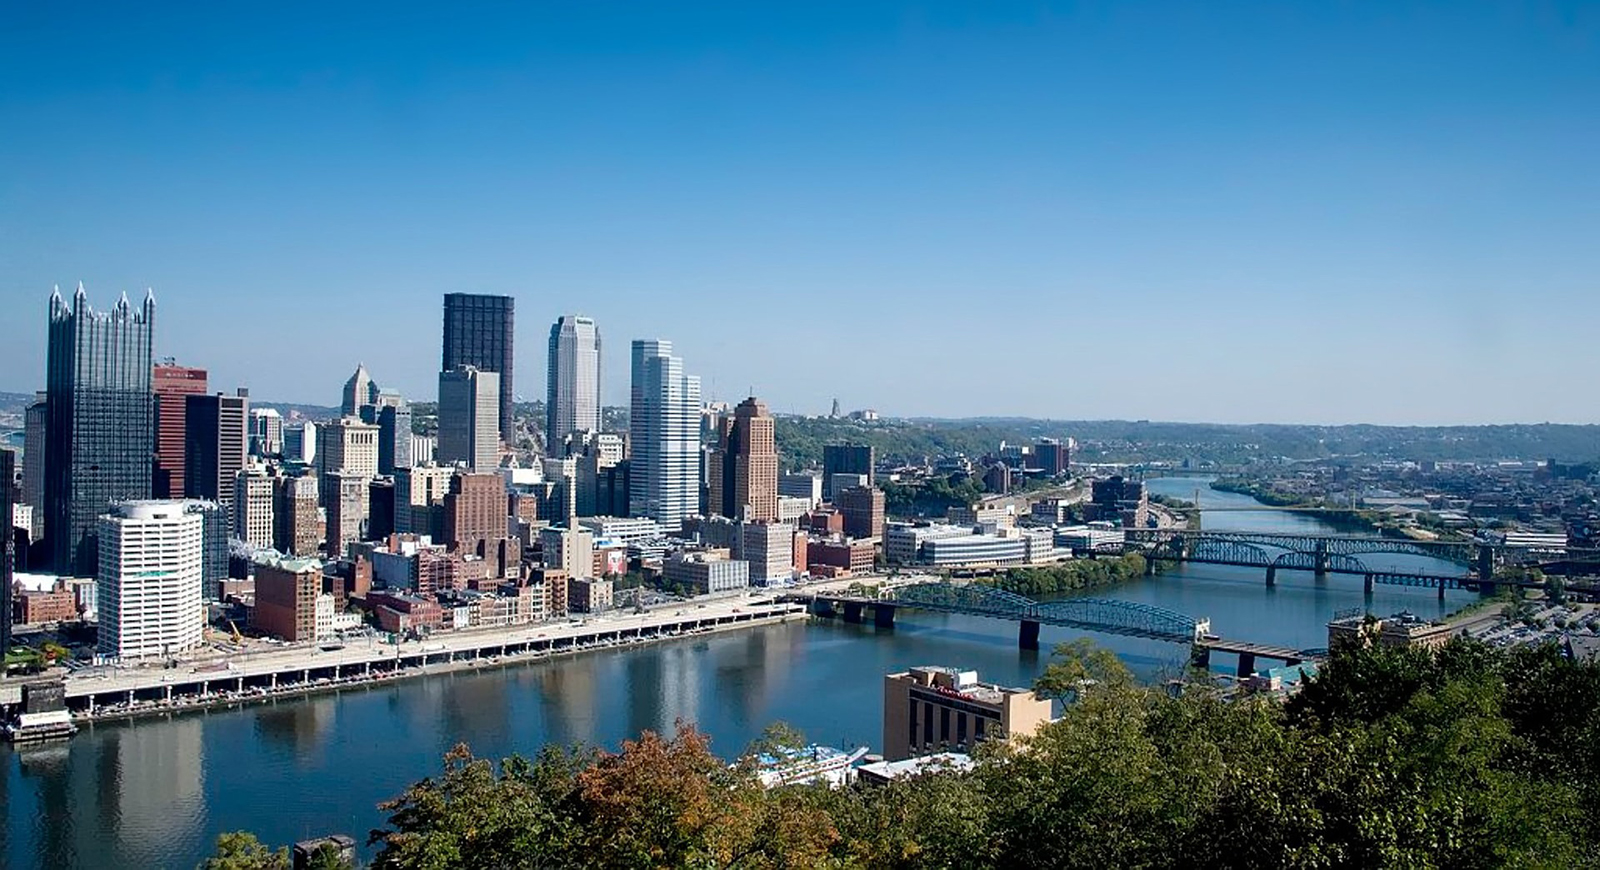 Aerial view of Pittsburgh's city and rivers, with a bright blue sky